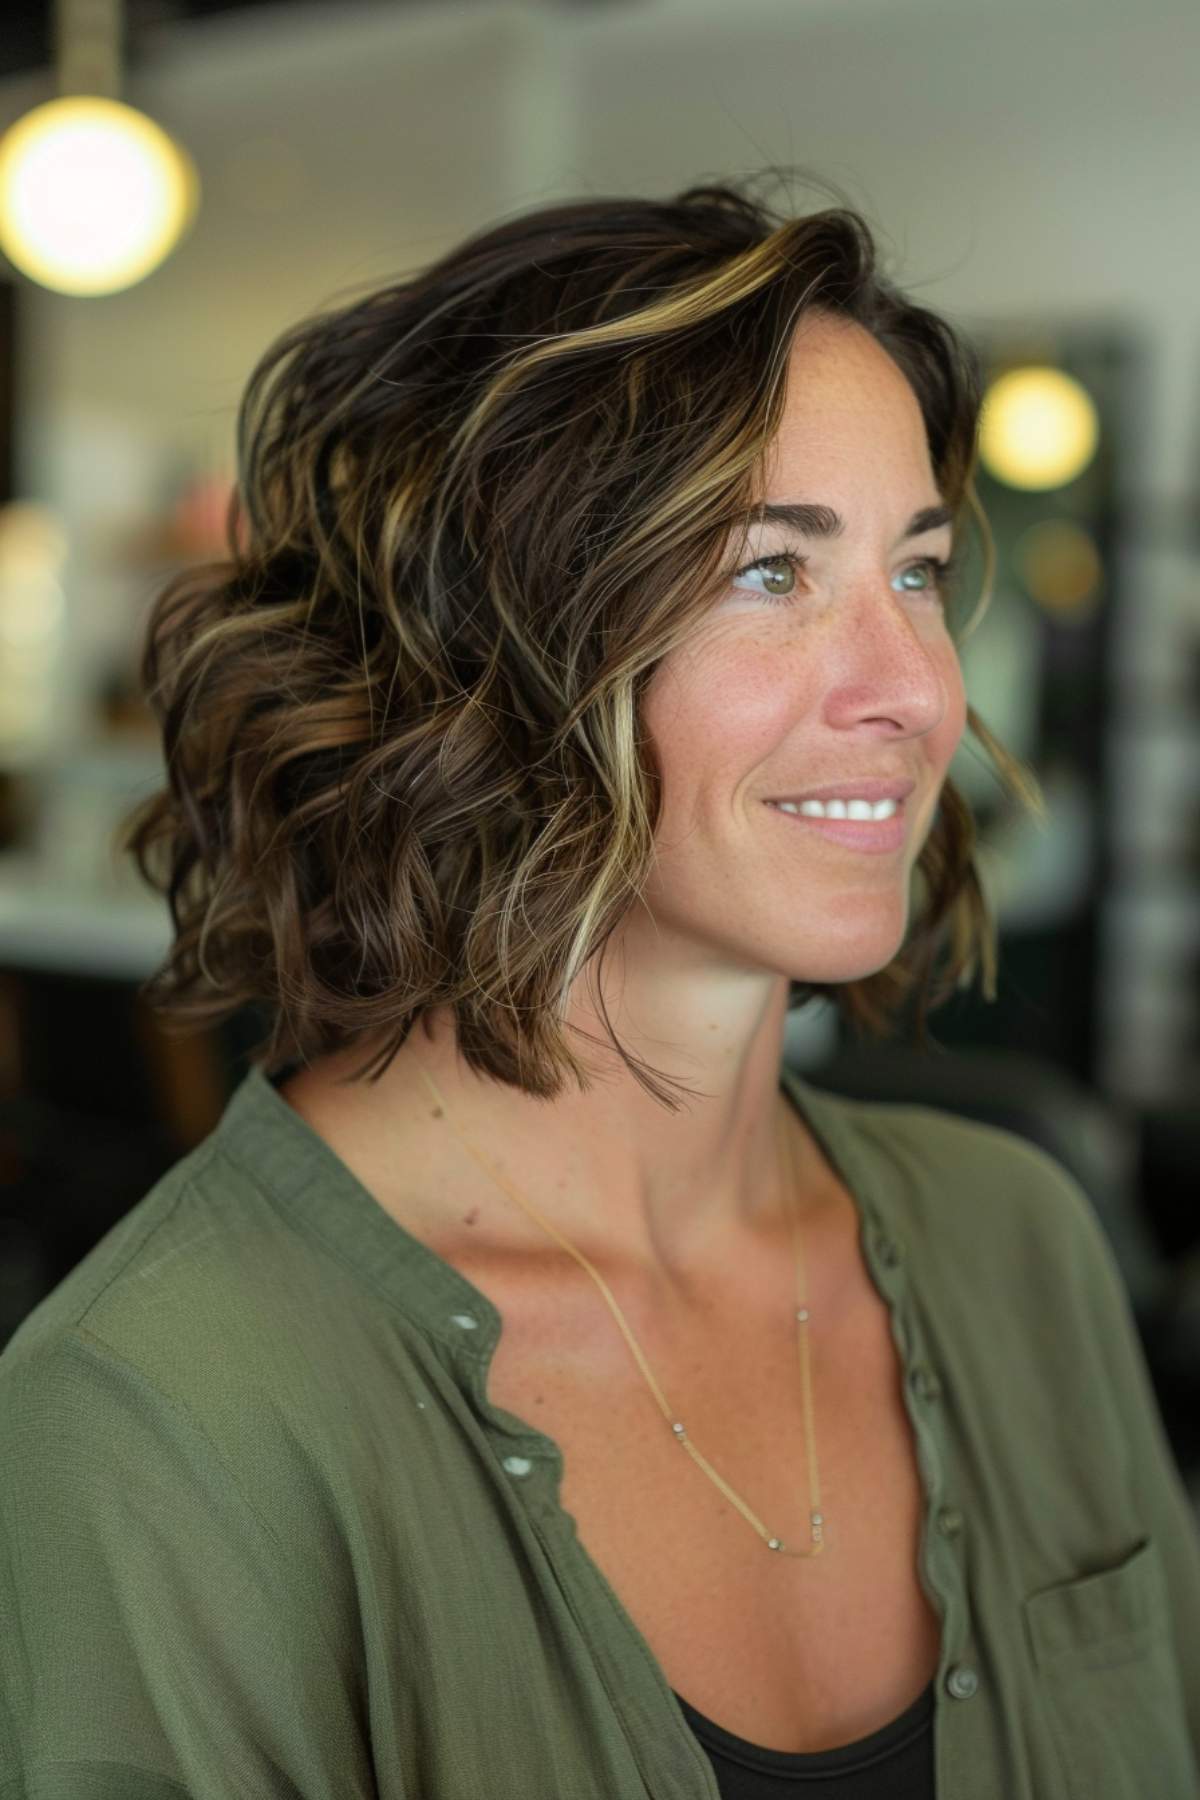 Wavy layered cut with highlights for women over 40 with medium to thick hair.